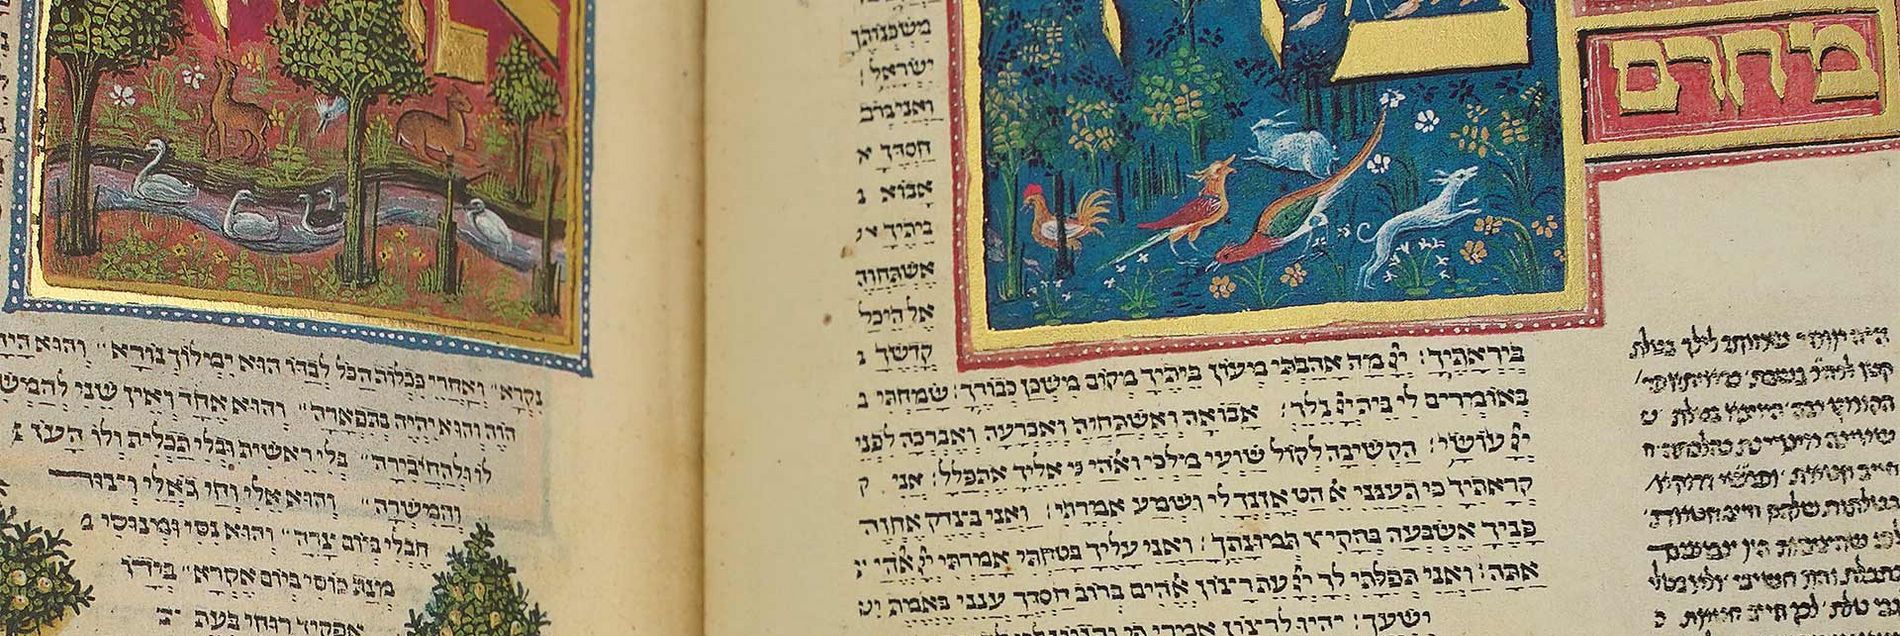 <i>“One of the most important testimonies of Jewish life in the Middle Ages”</i>